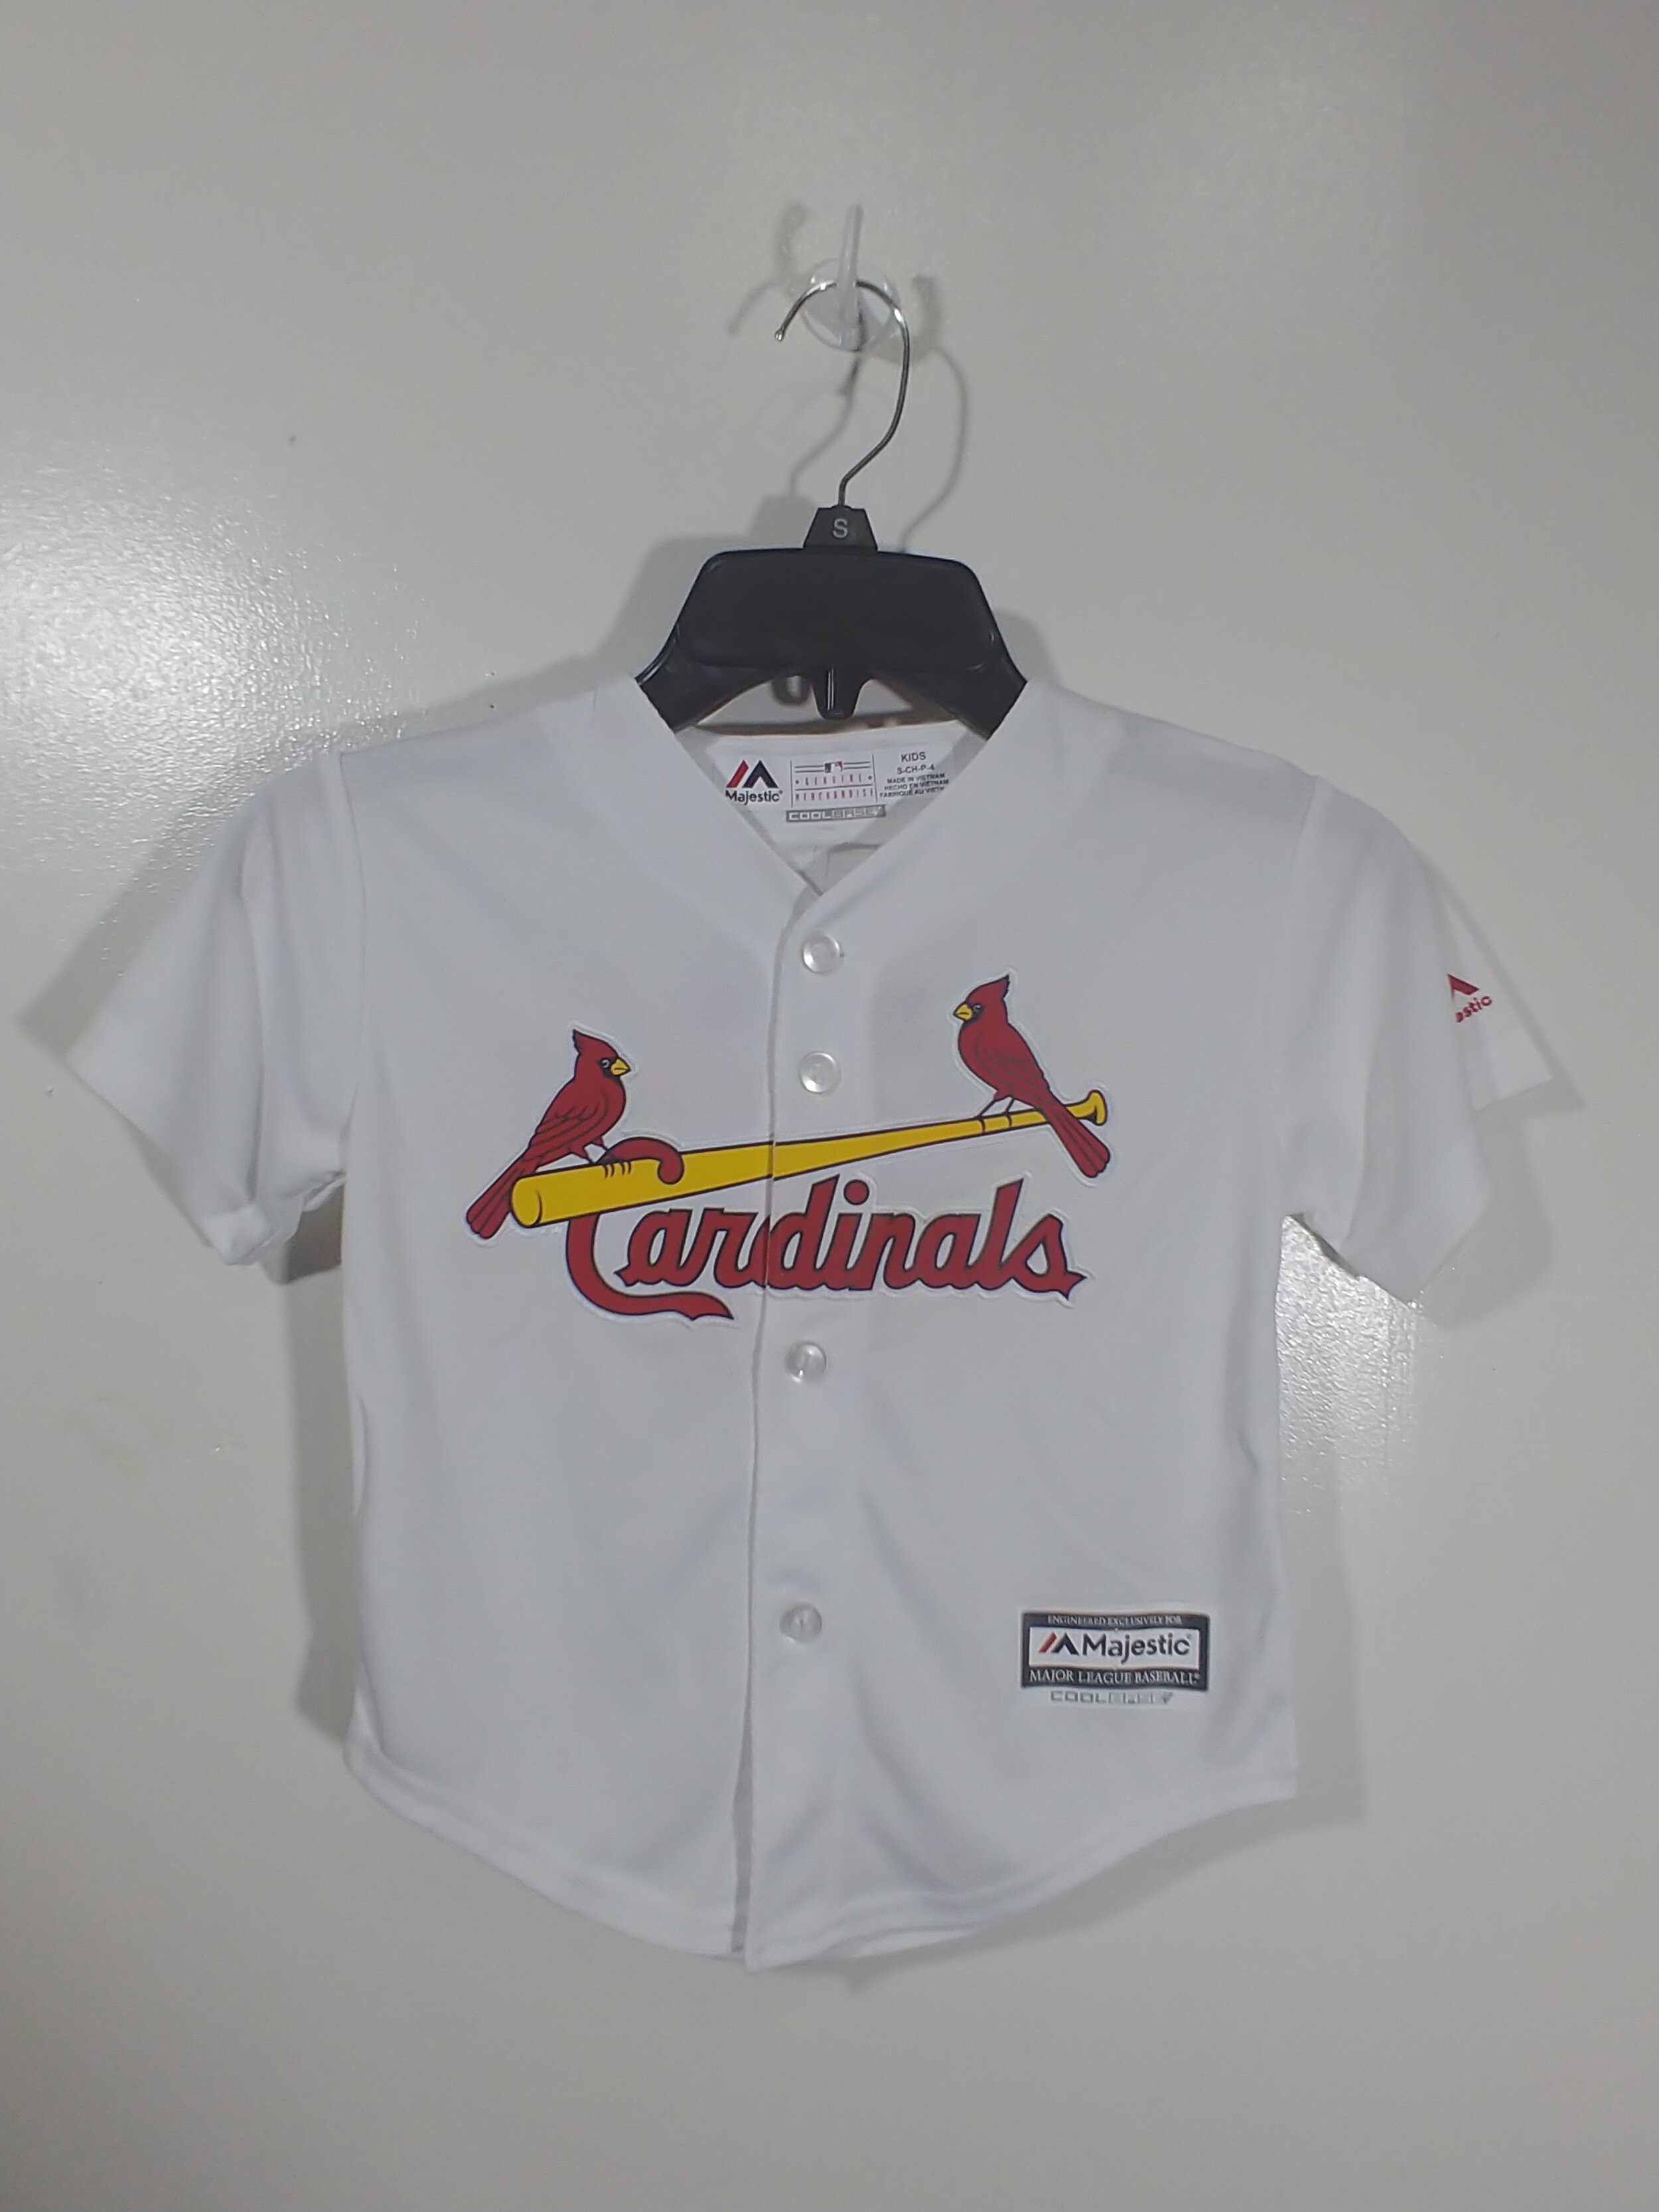 Majestic St. Louis Cardinals T-shirt Youth Small